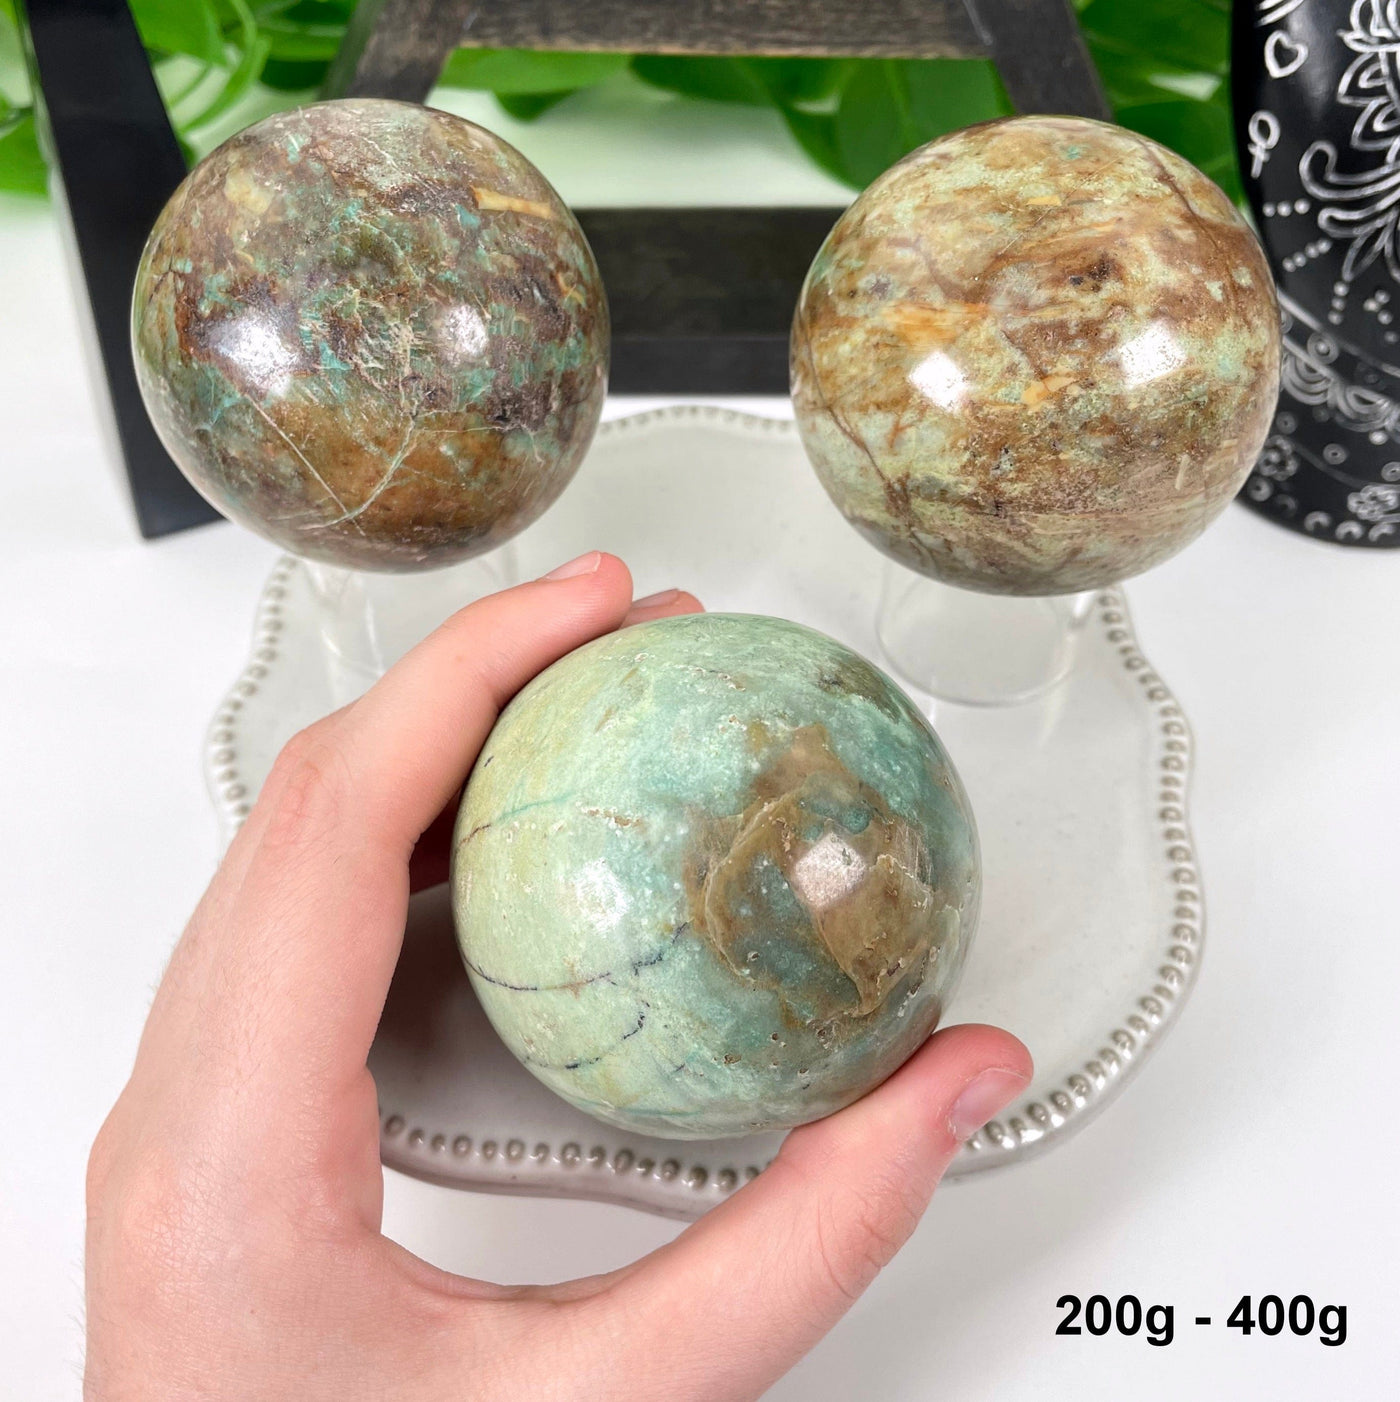 three 200g - 400g chrysoprase polished spheres on display for possible variations with one in hand for size reference